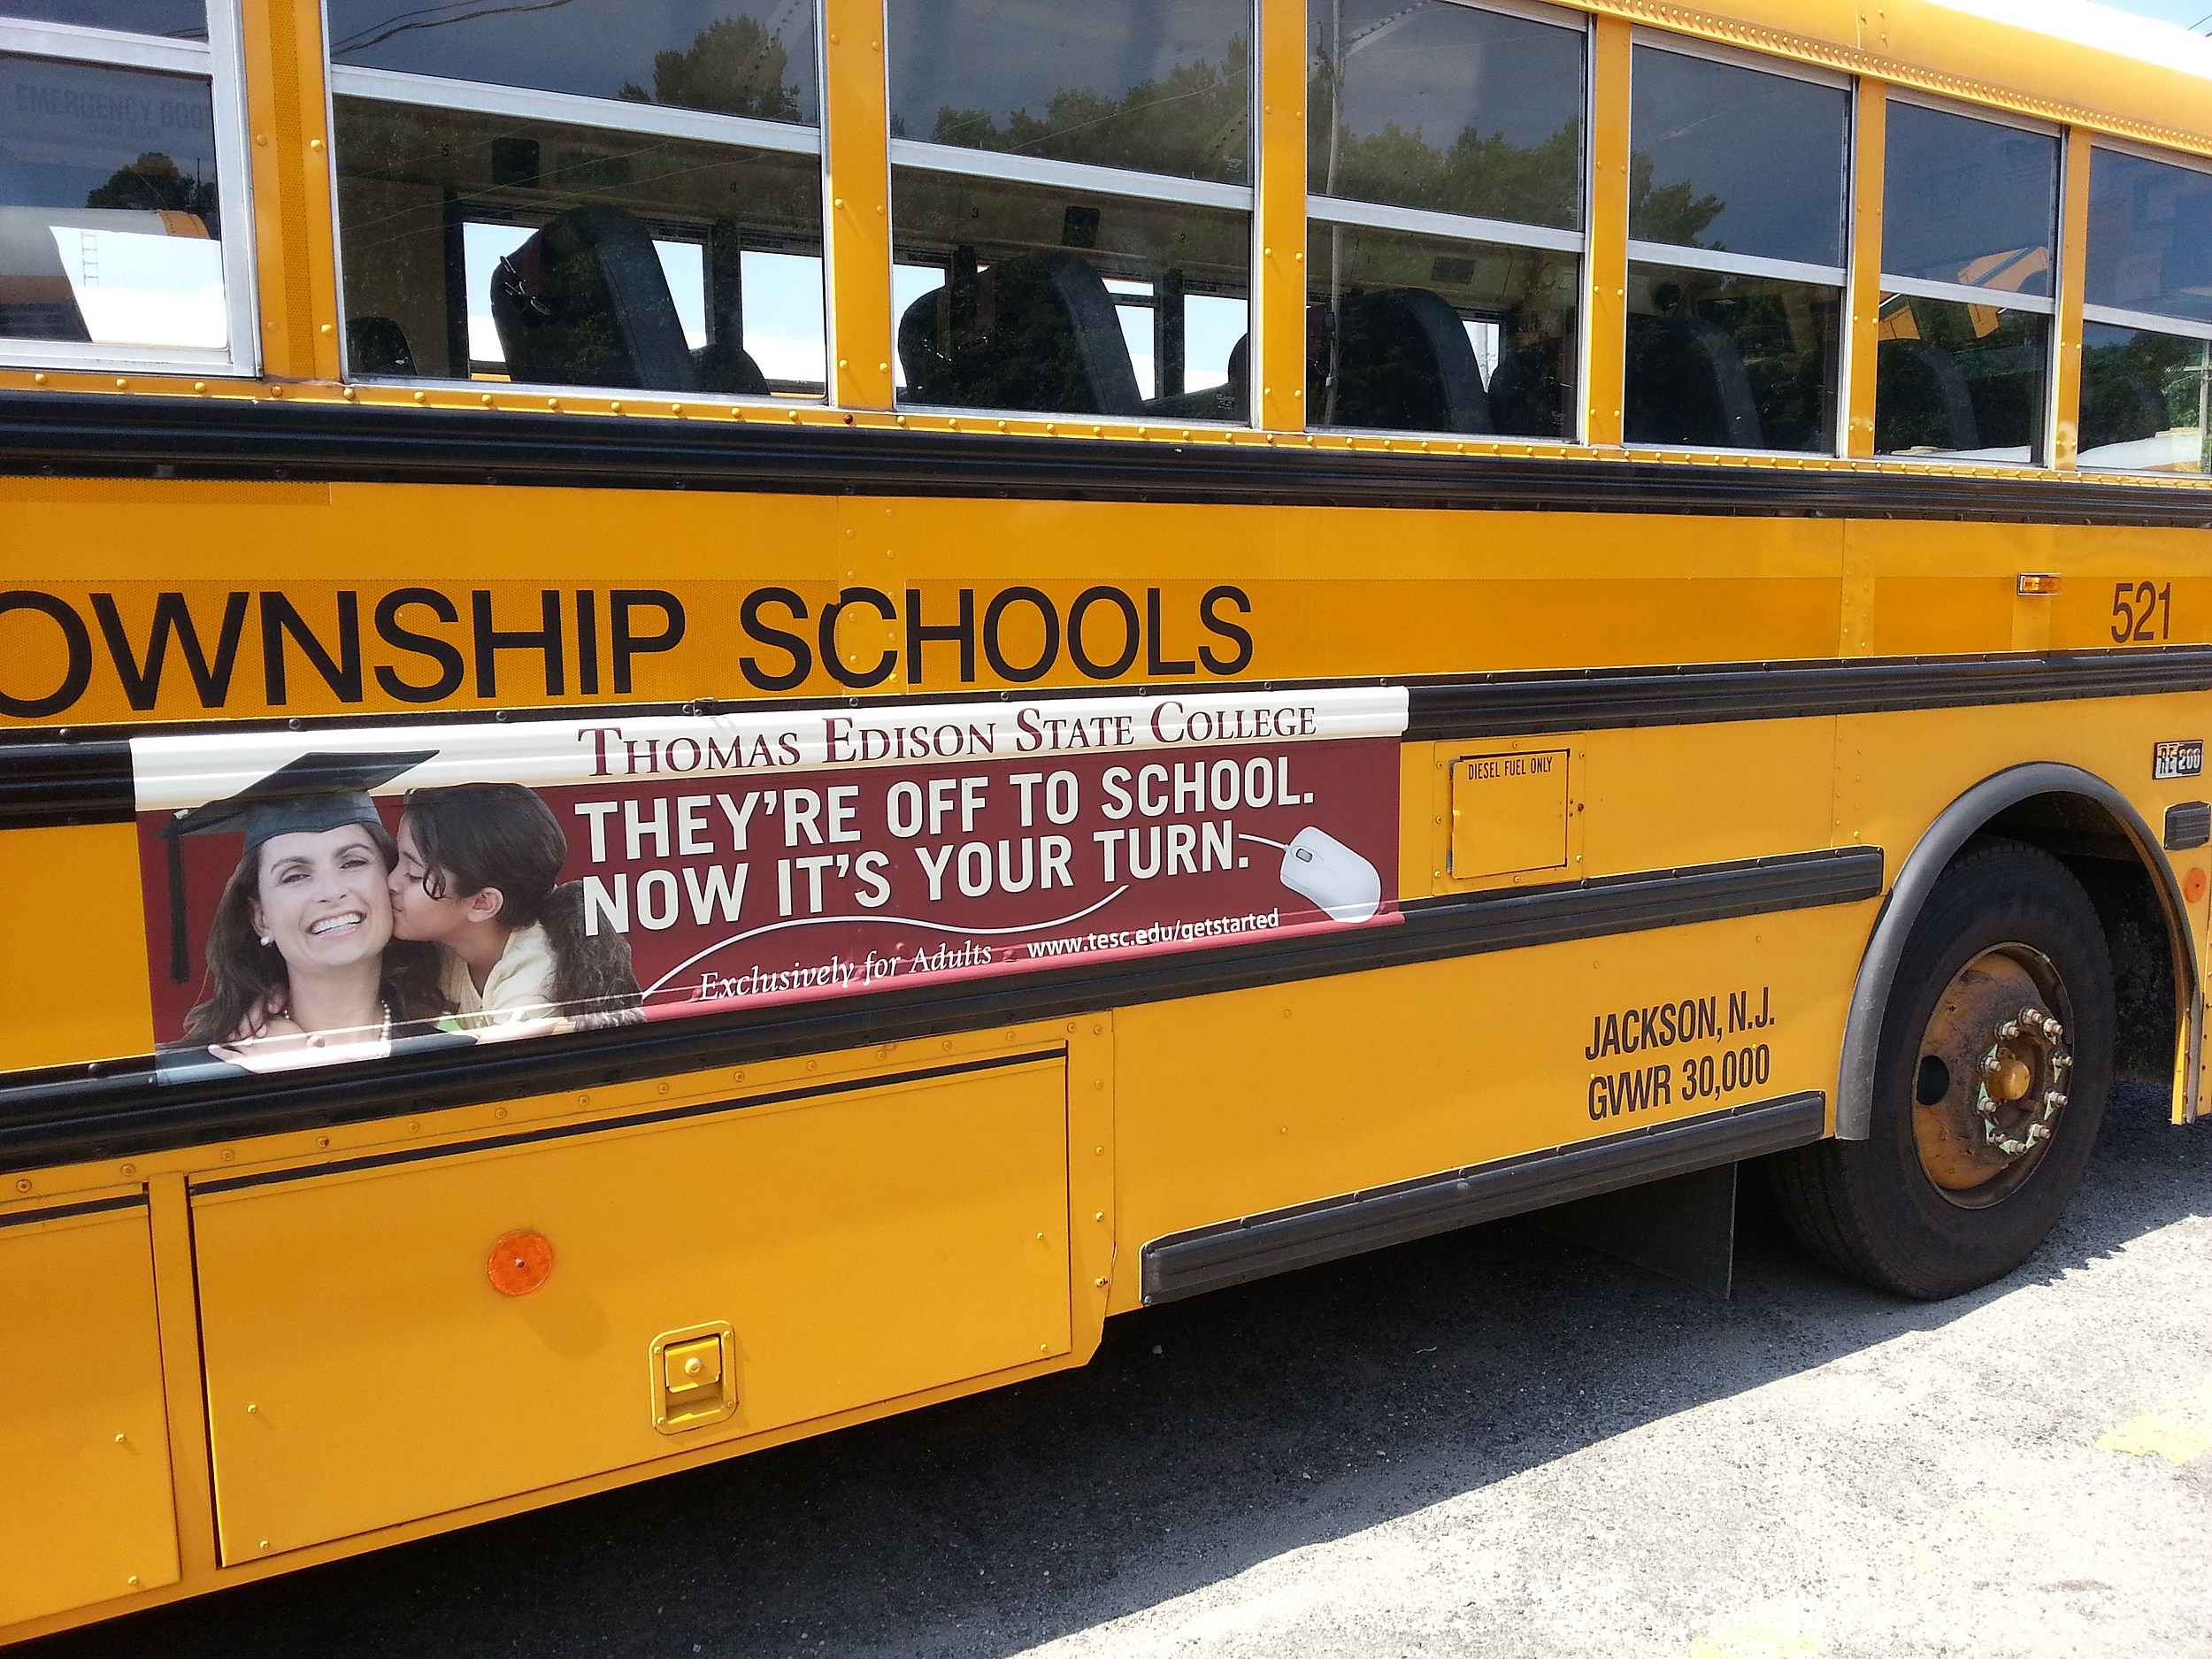 Bus Advertising in New Jersey (NJ) - Get New Jersey Bus Ads and Bus Stop  Shelter Ads Here